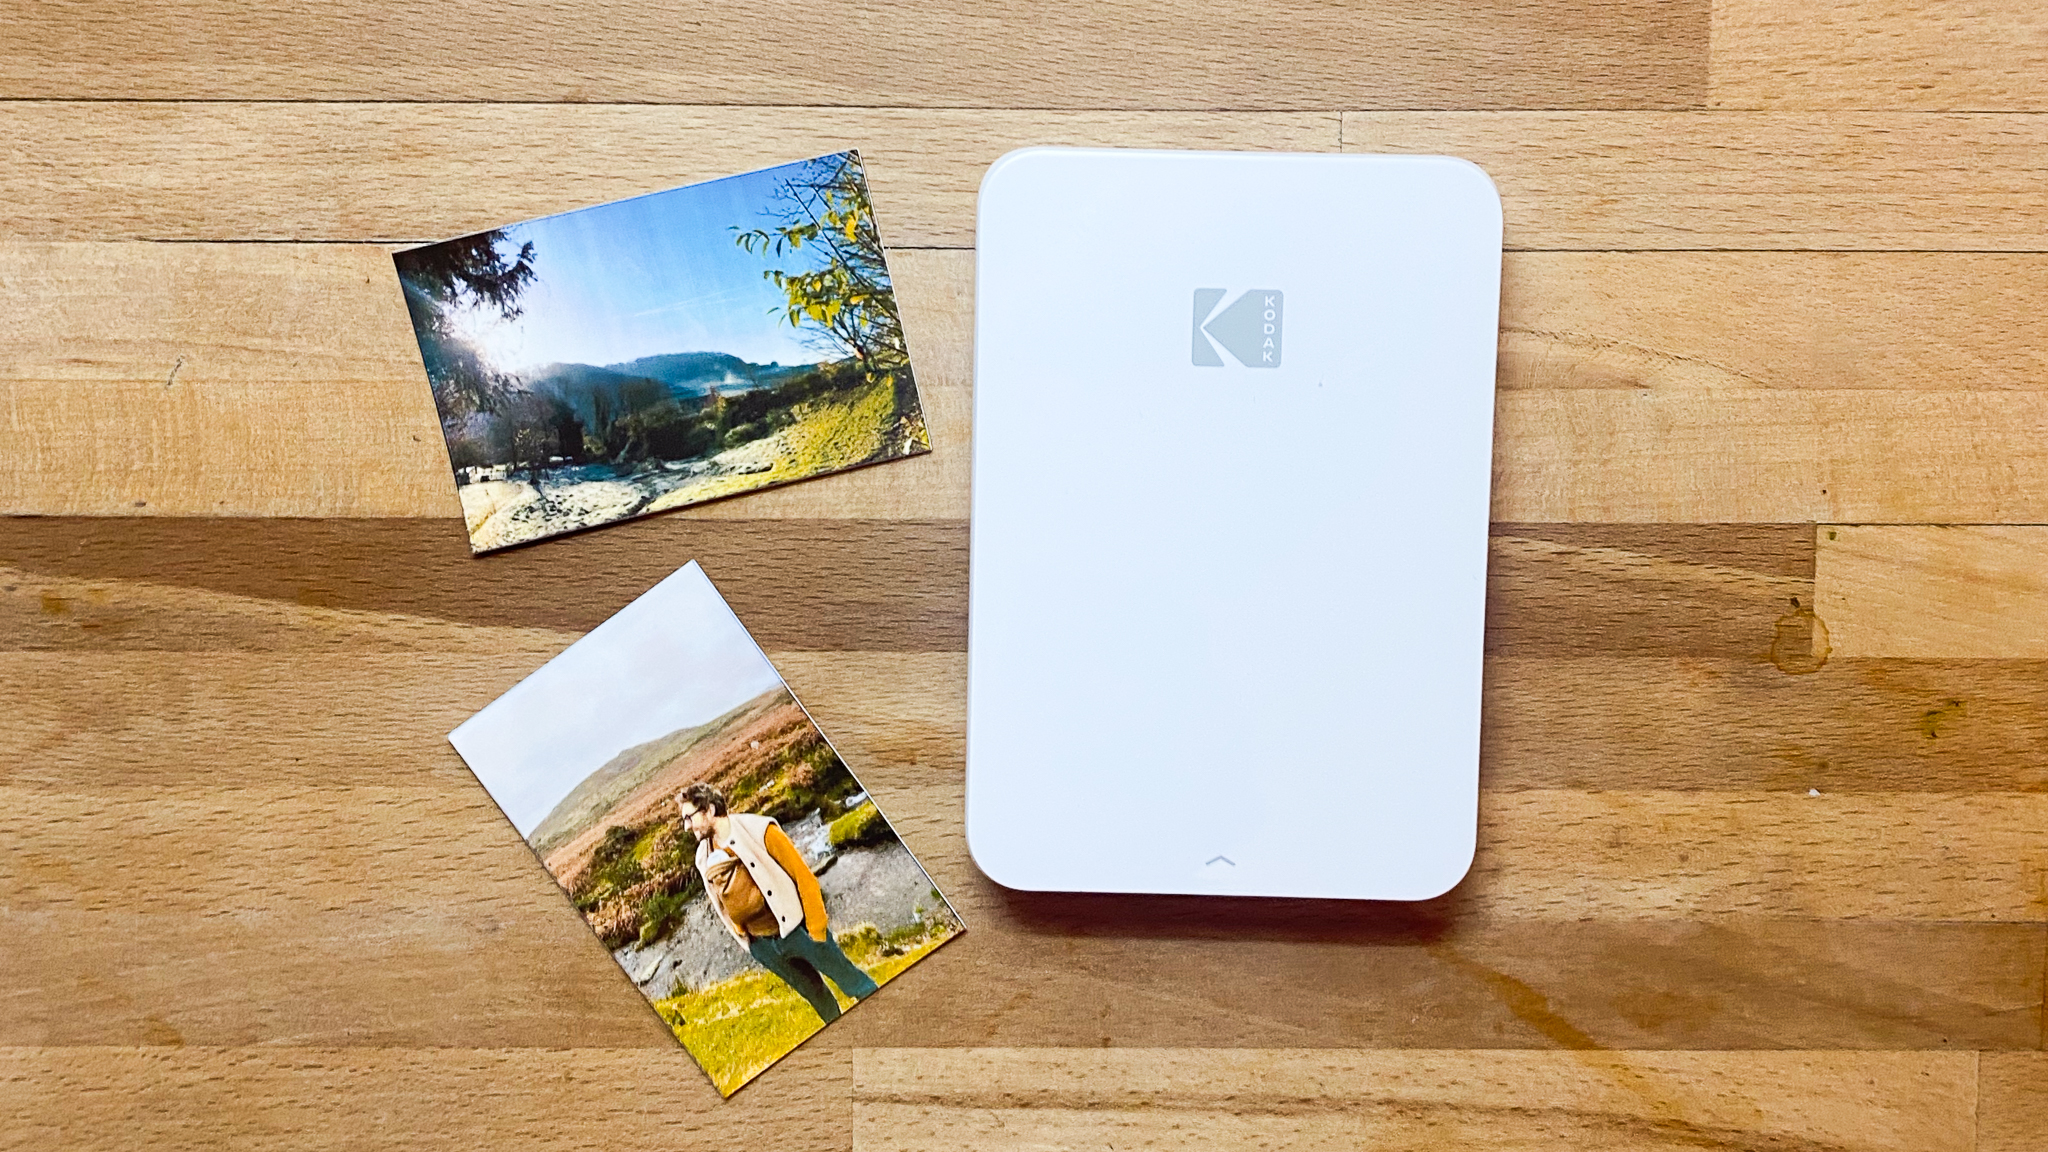 KODAK Step Slim Instant Mobile Color Photo Printer – Wirelessly Print 2x3”  Photos on Zink Paper with iOS & Android Devices, White